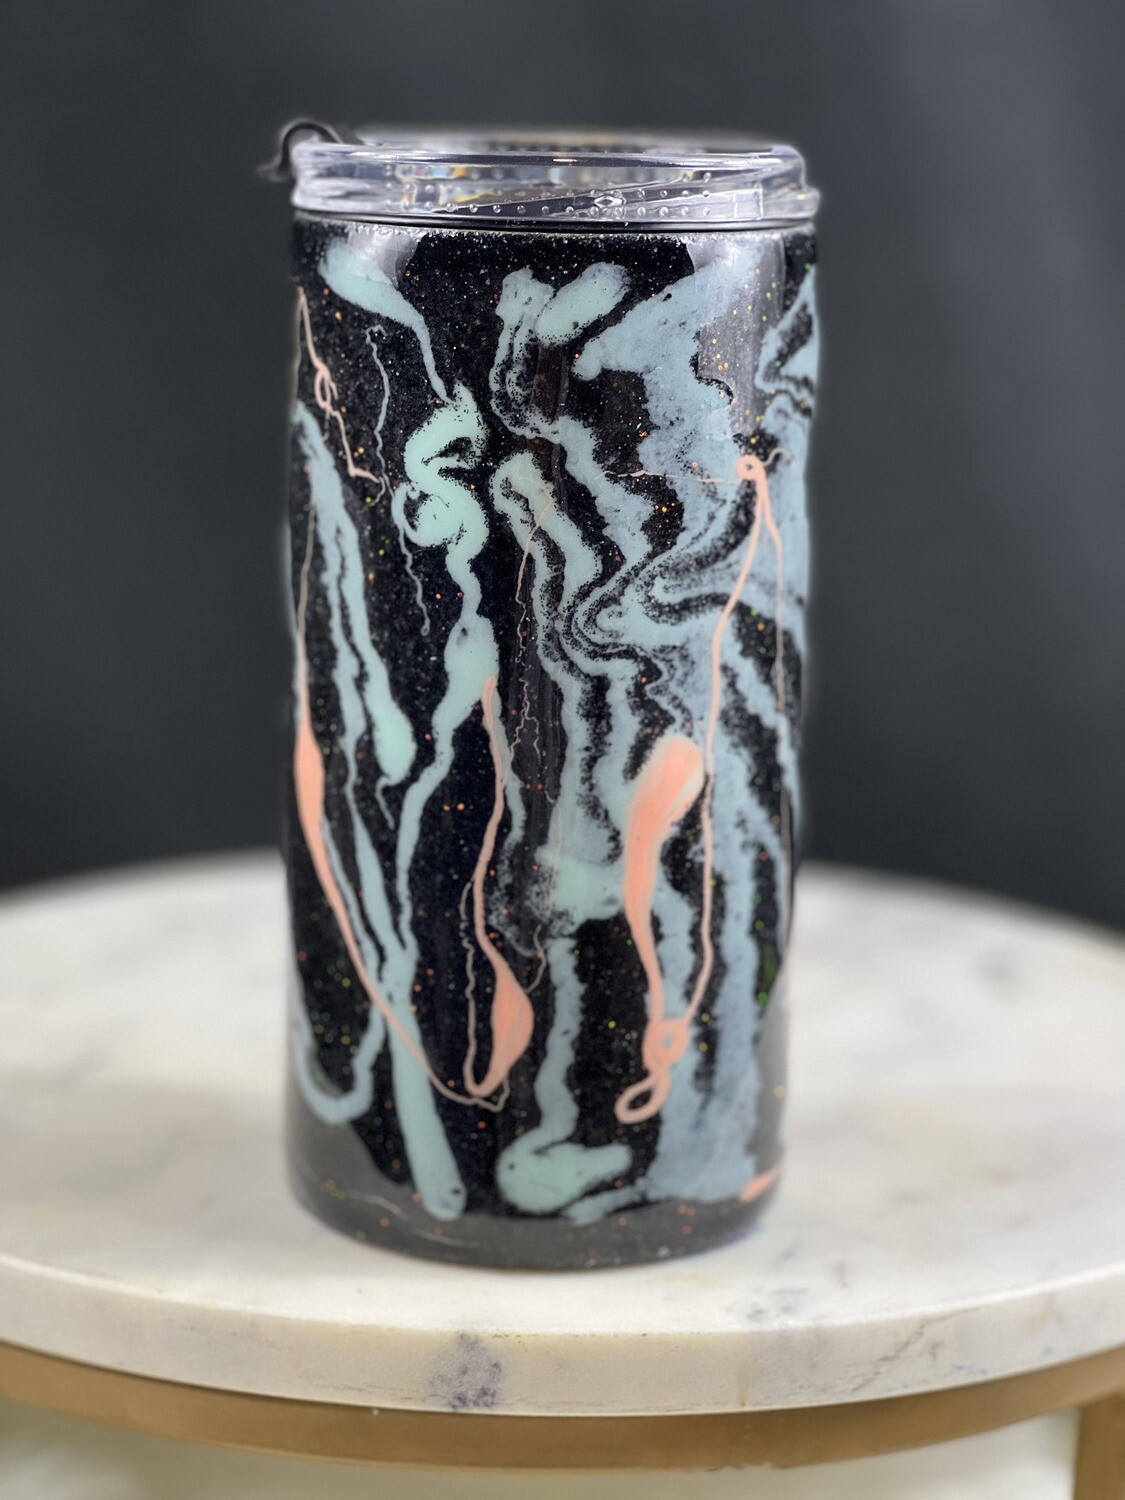 Epoxy 18 oz. 3 in 1 Beer can tumbler